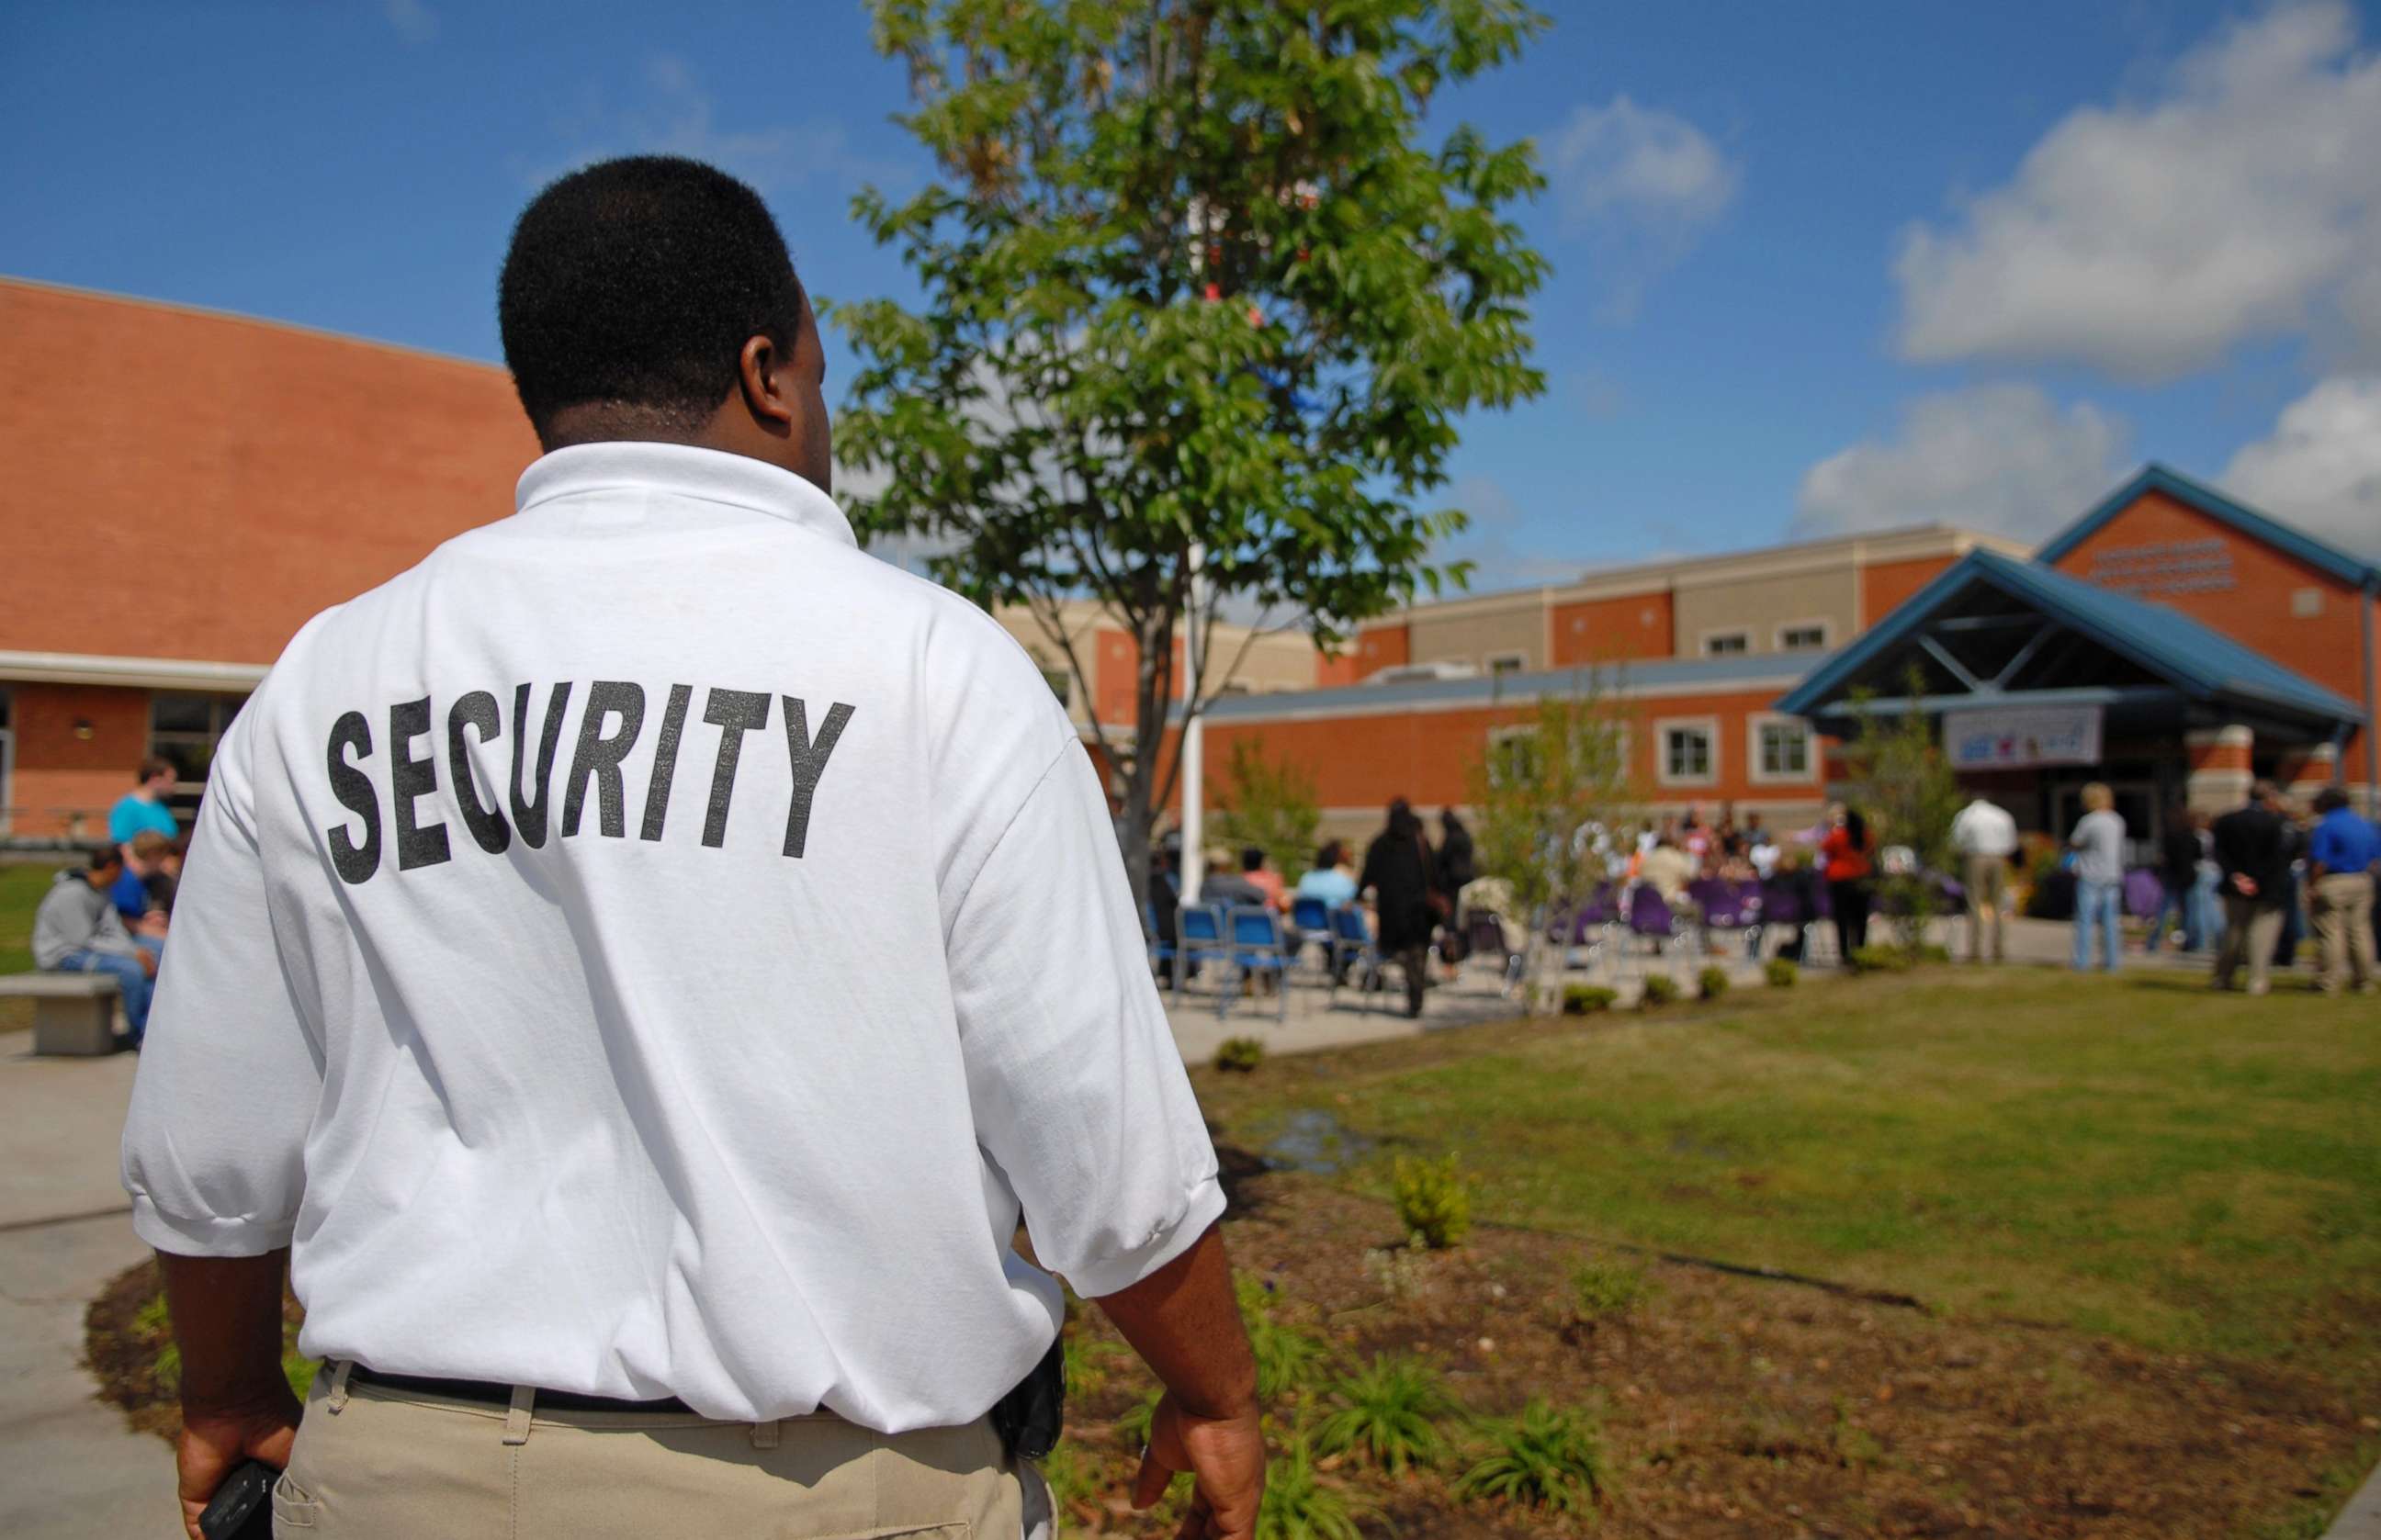 PHOTO: A security guard at a public junior high school is pictured in this undated stock photo.